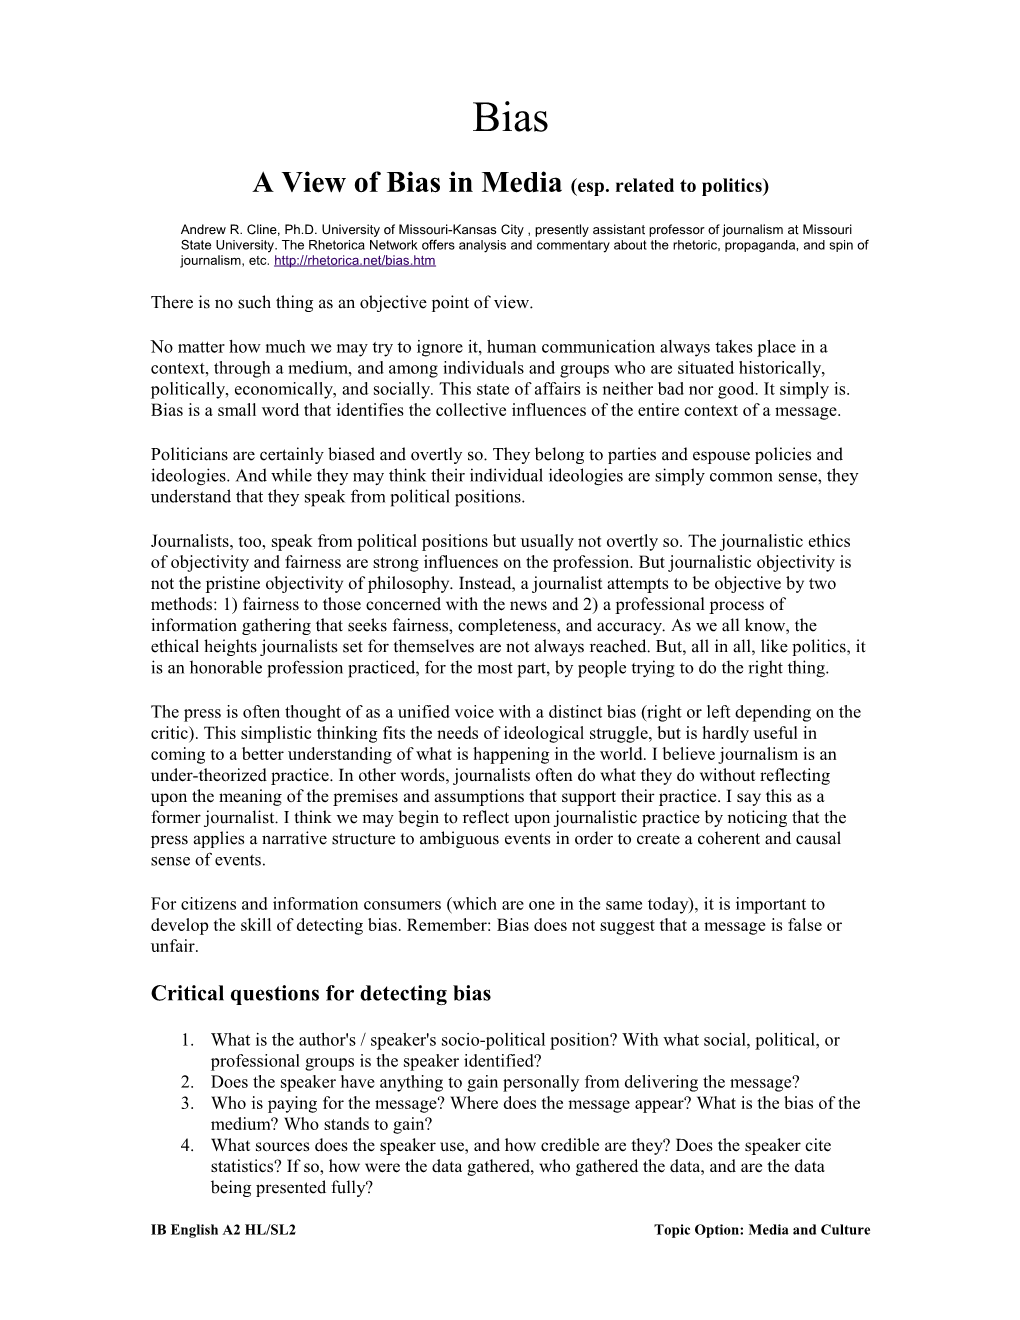 A View of Bias in Media (Esp. Related to Politics)